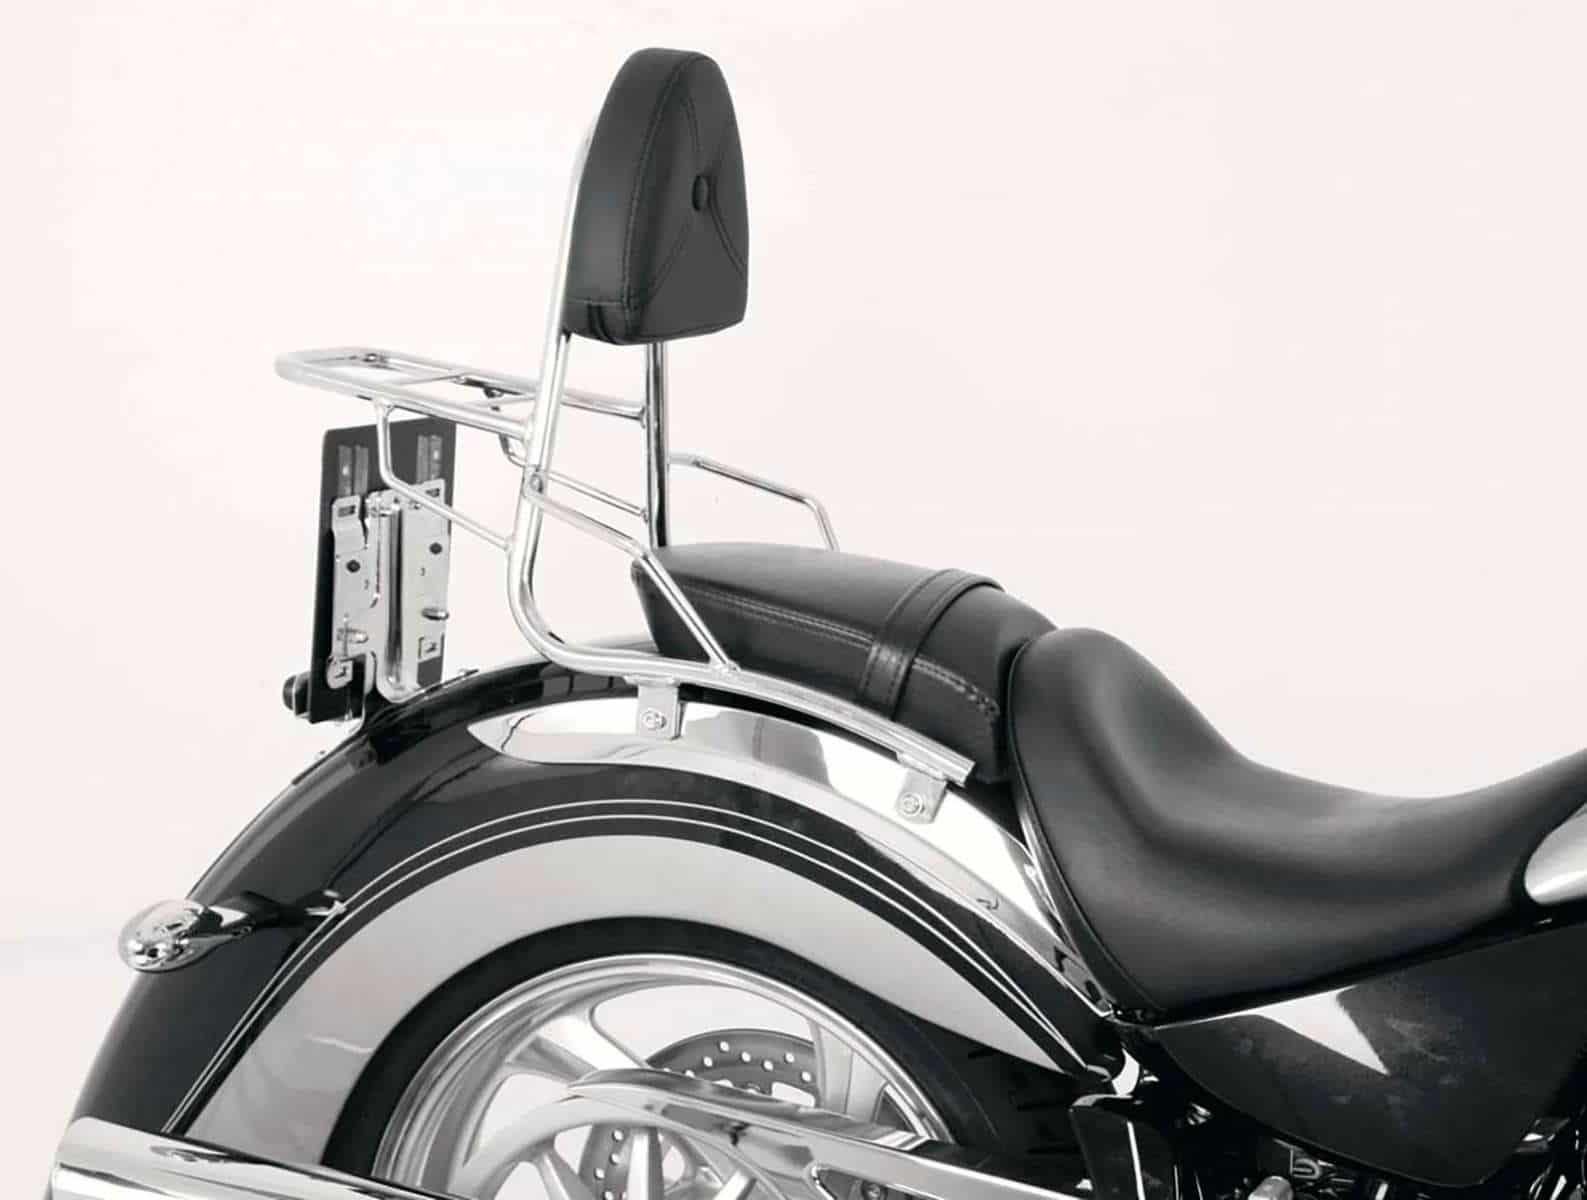 Sissybar with rearrack chrome for Victory Kingpin (2003-2016)